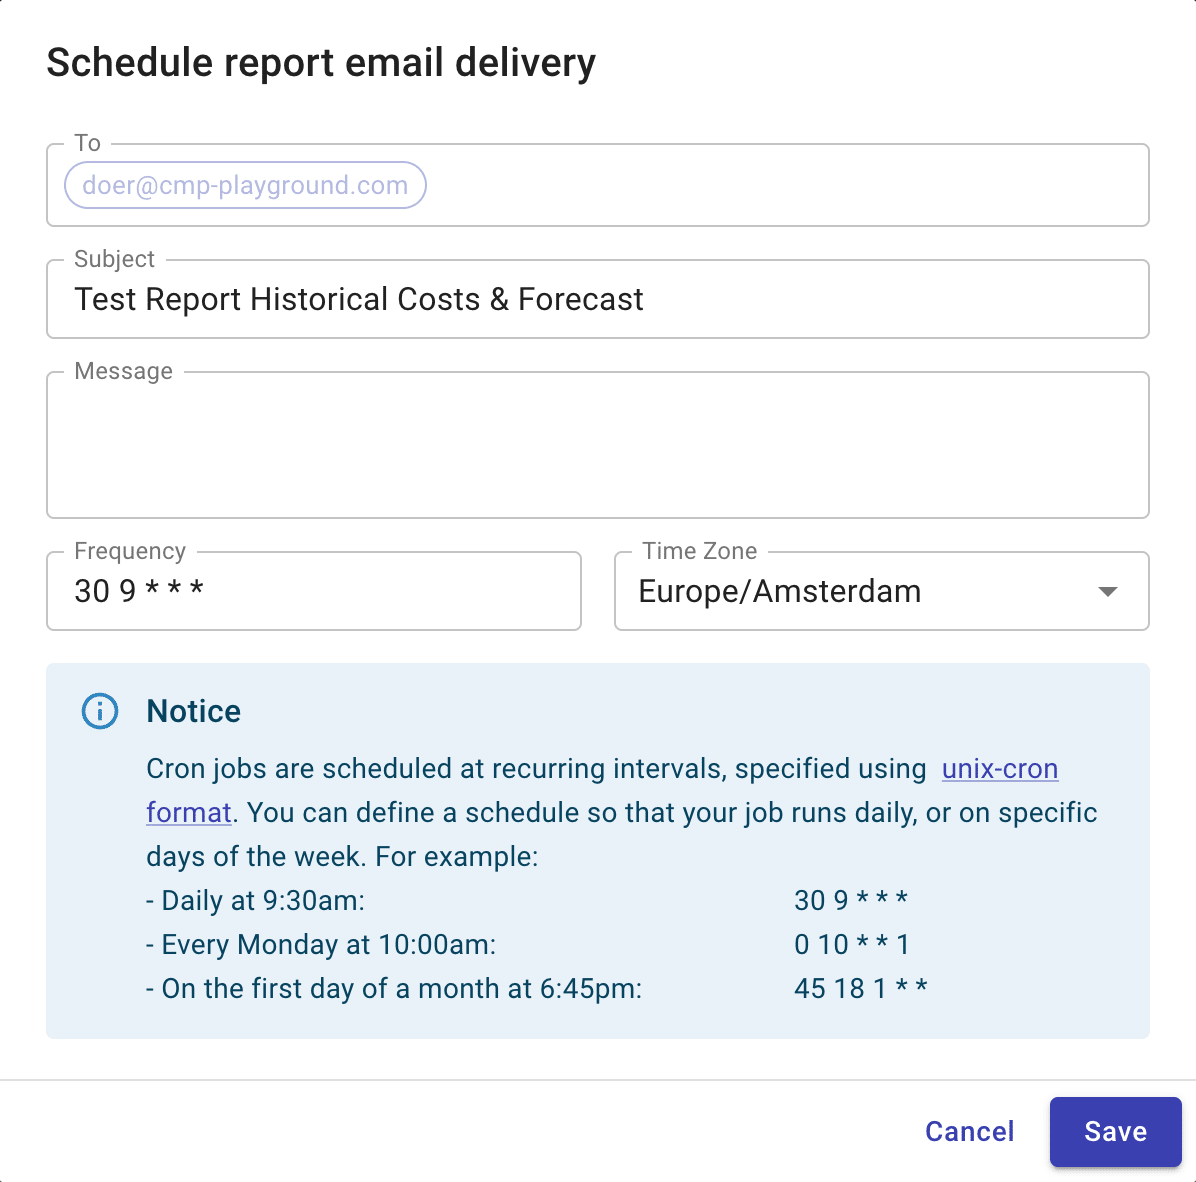 A screenshot showing the Schedule Report Email Delivery modal dialog